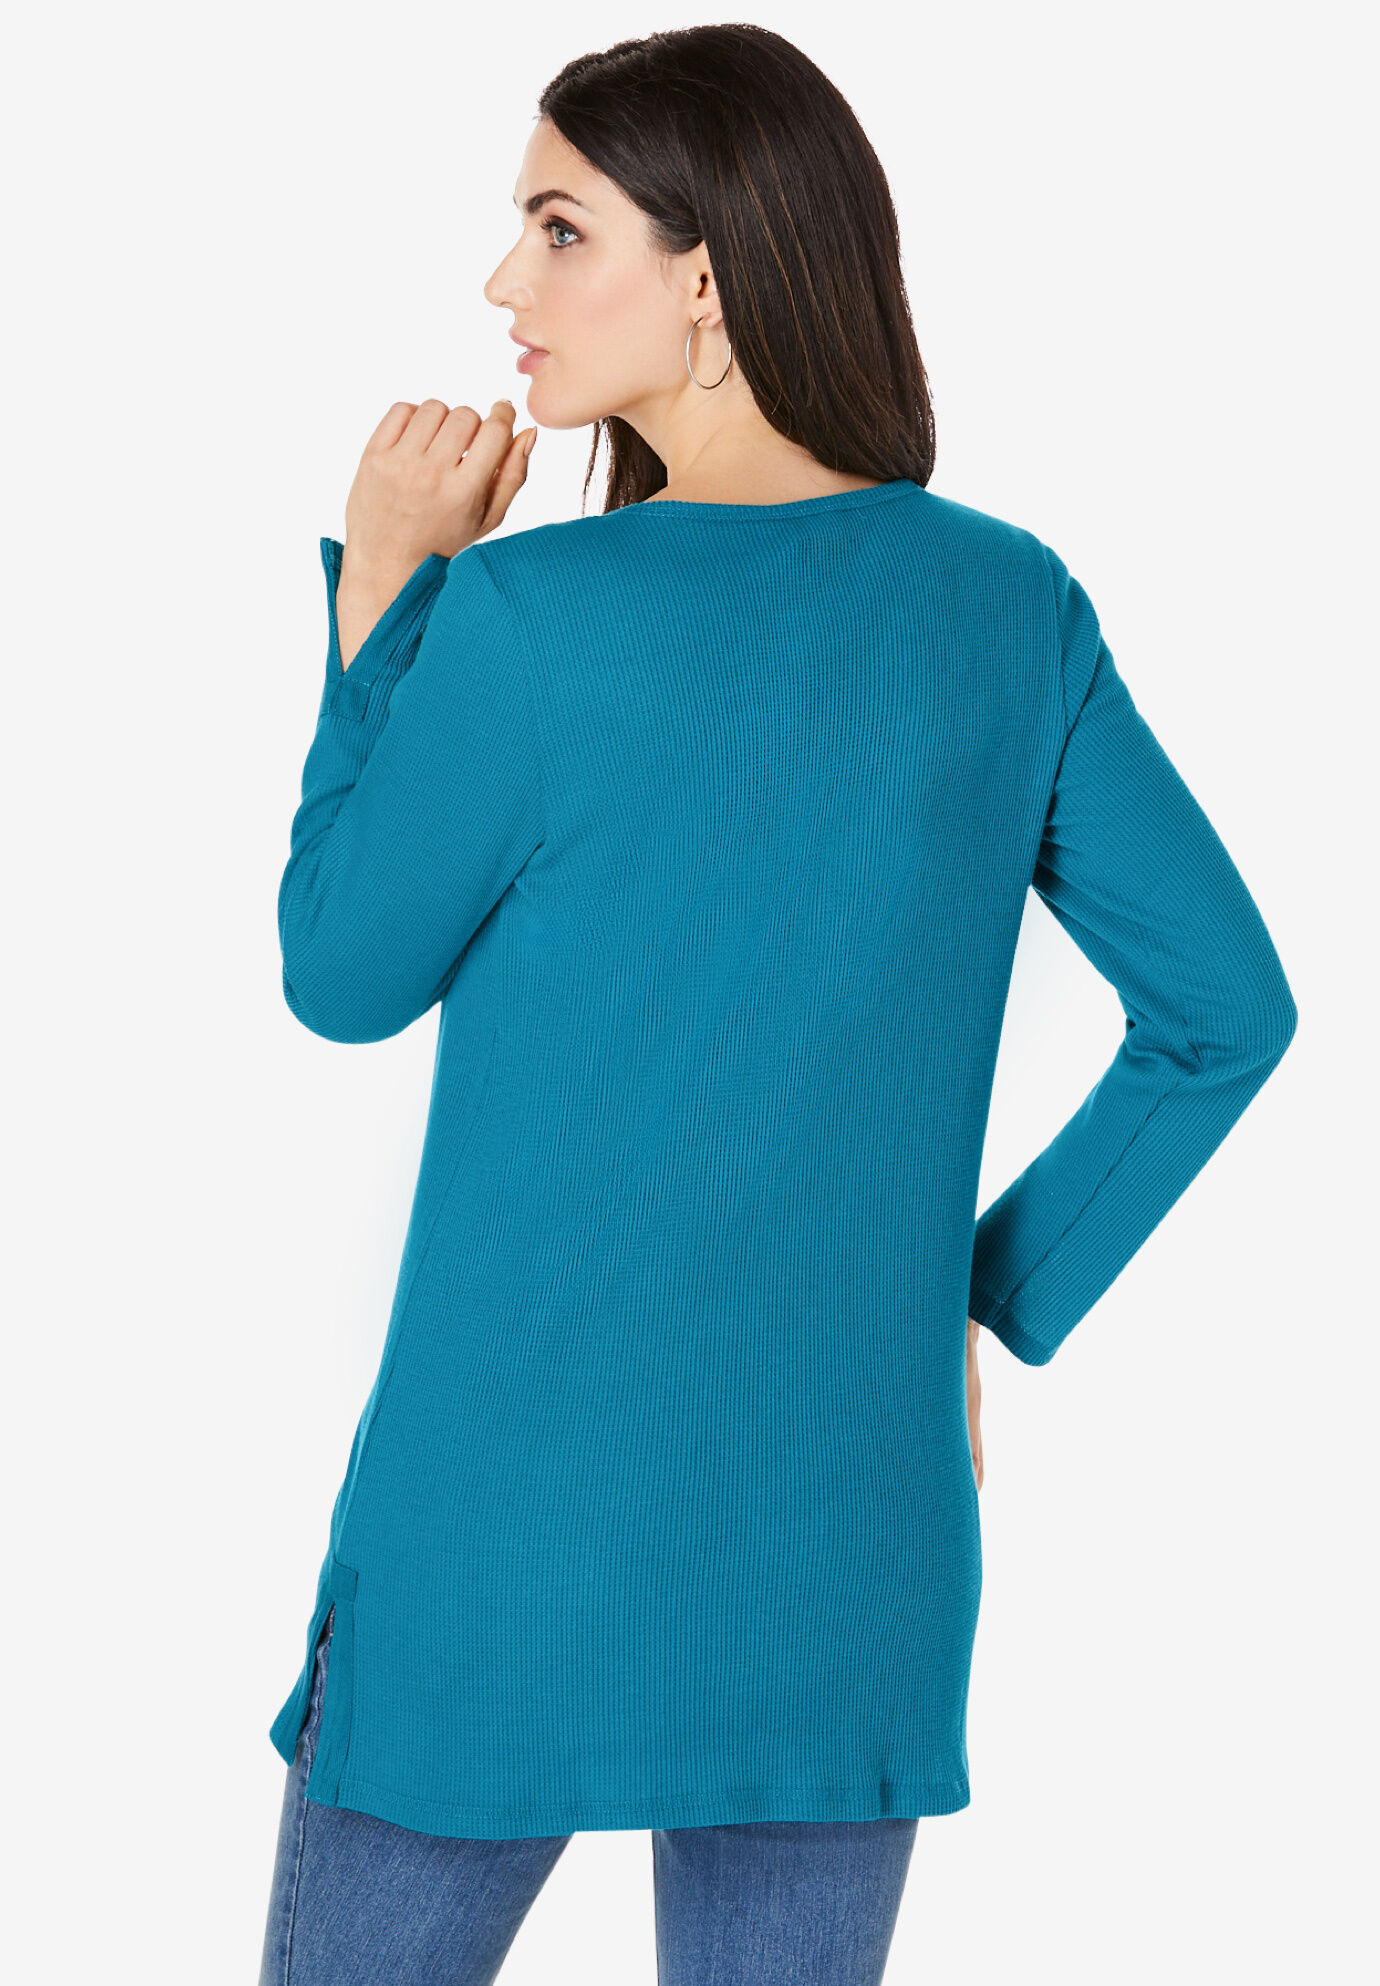 women's plus size thermal henley shirts